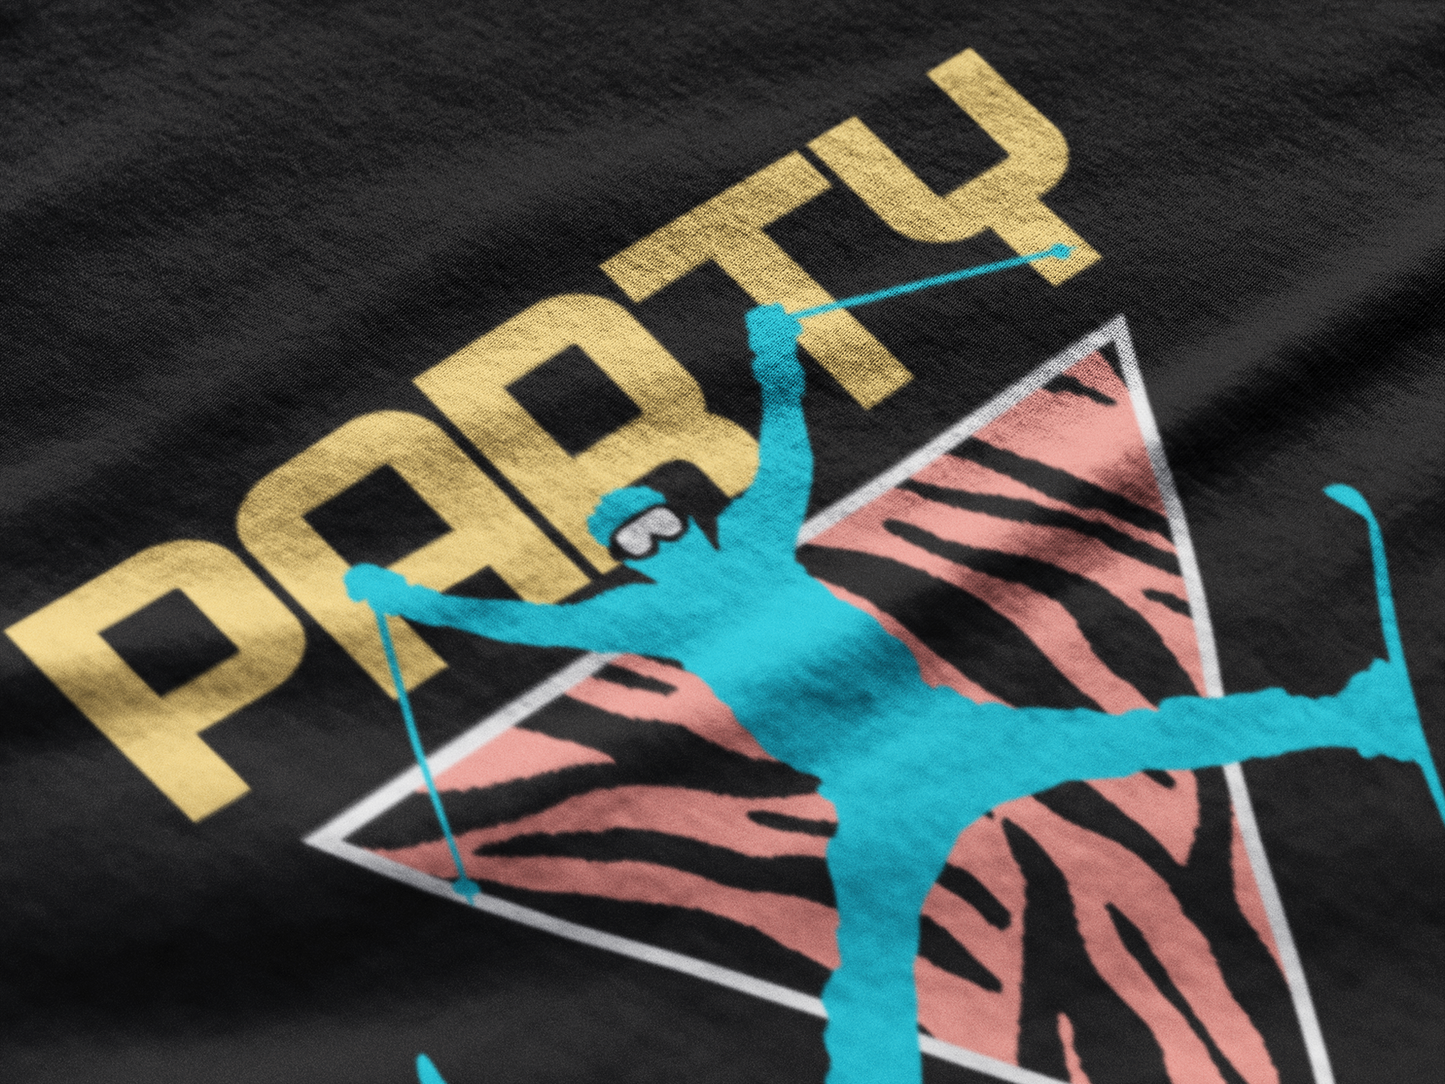 The Party Shirt